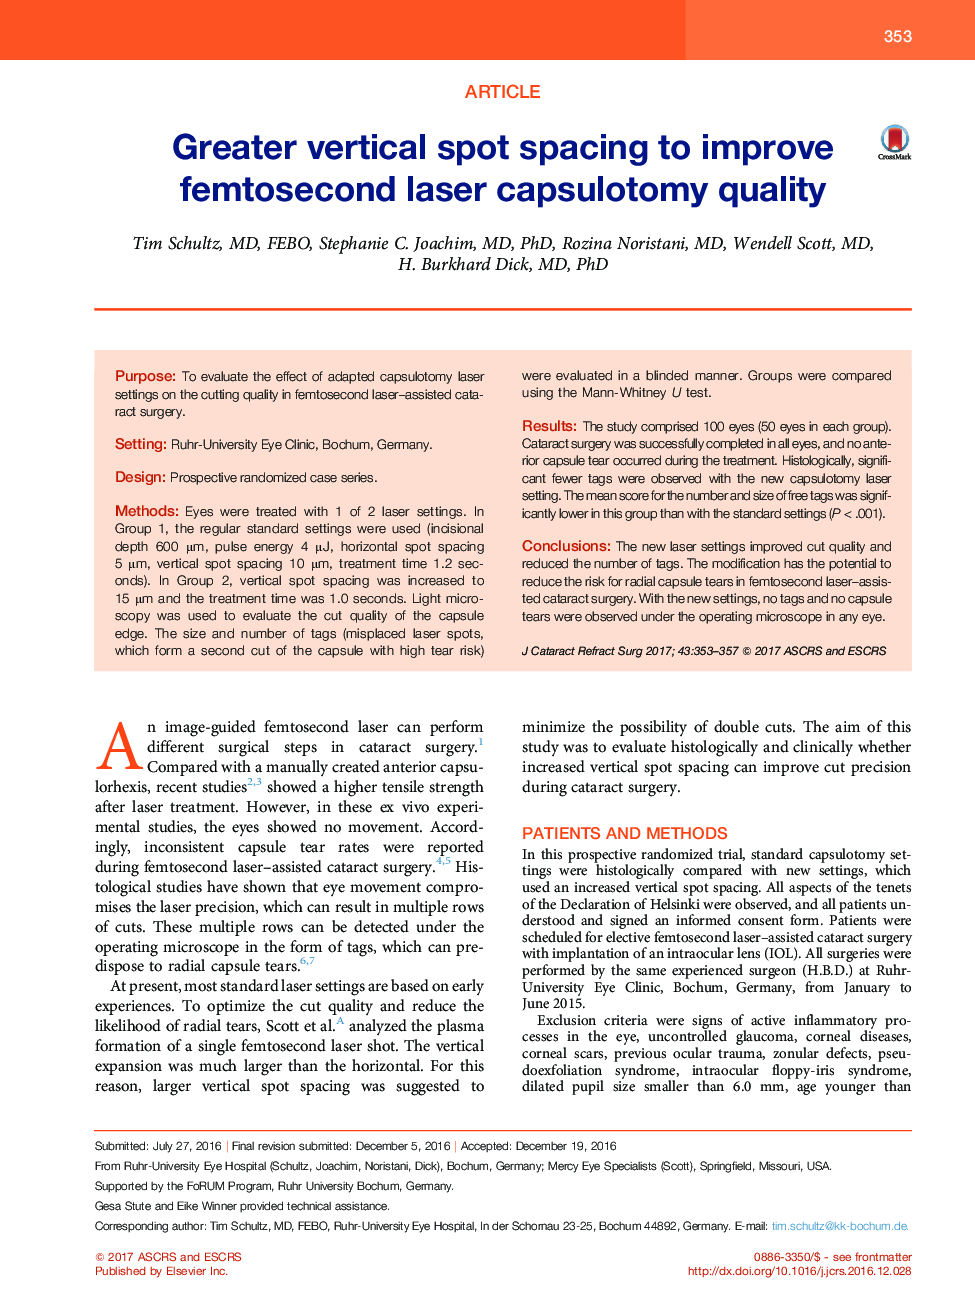 Greater vertical spot spacing to improve femtosecond laser capsulotomy quality